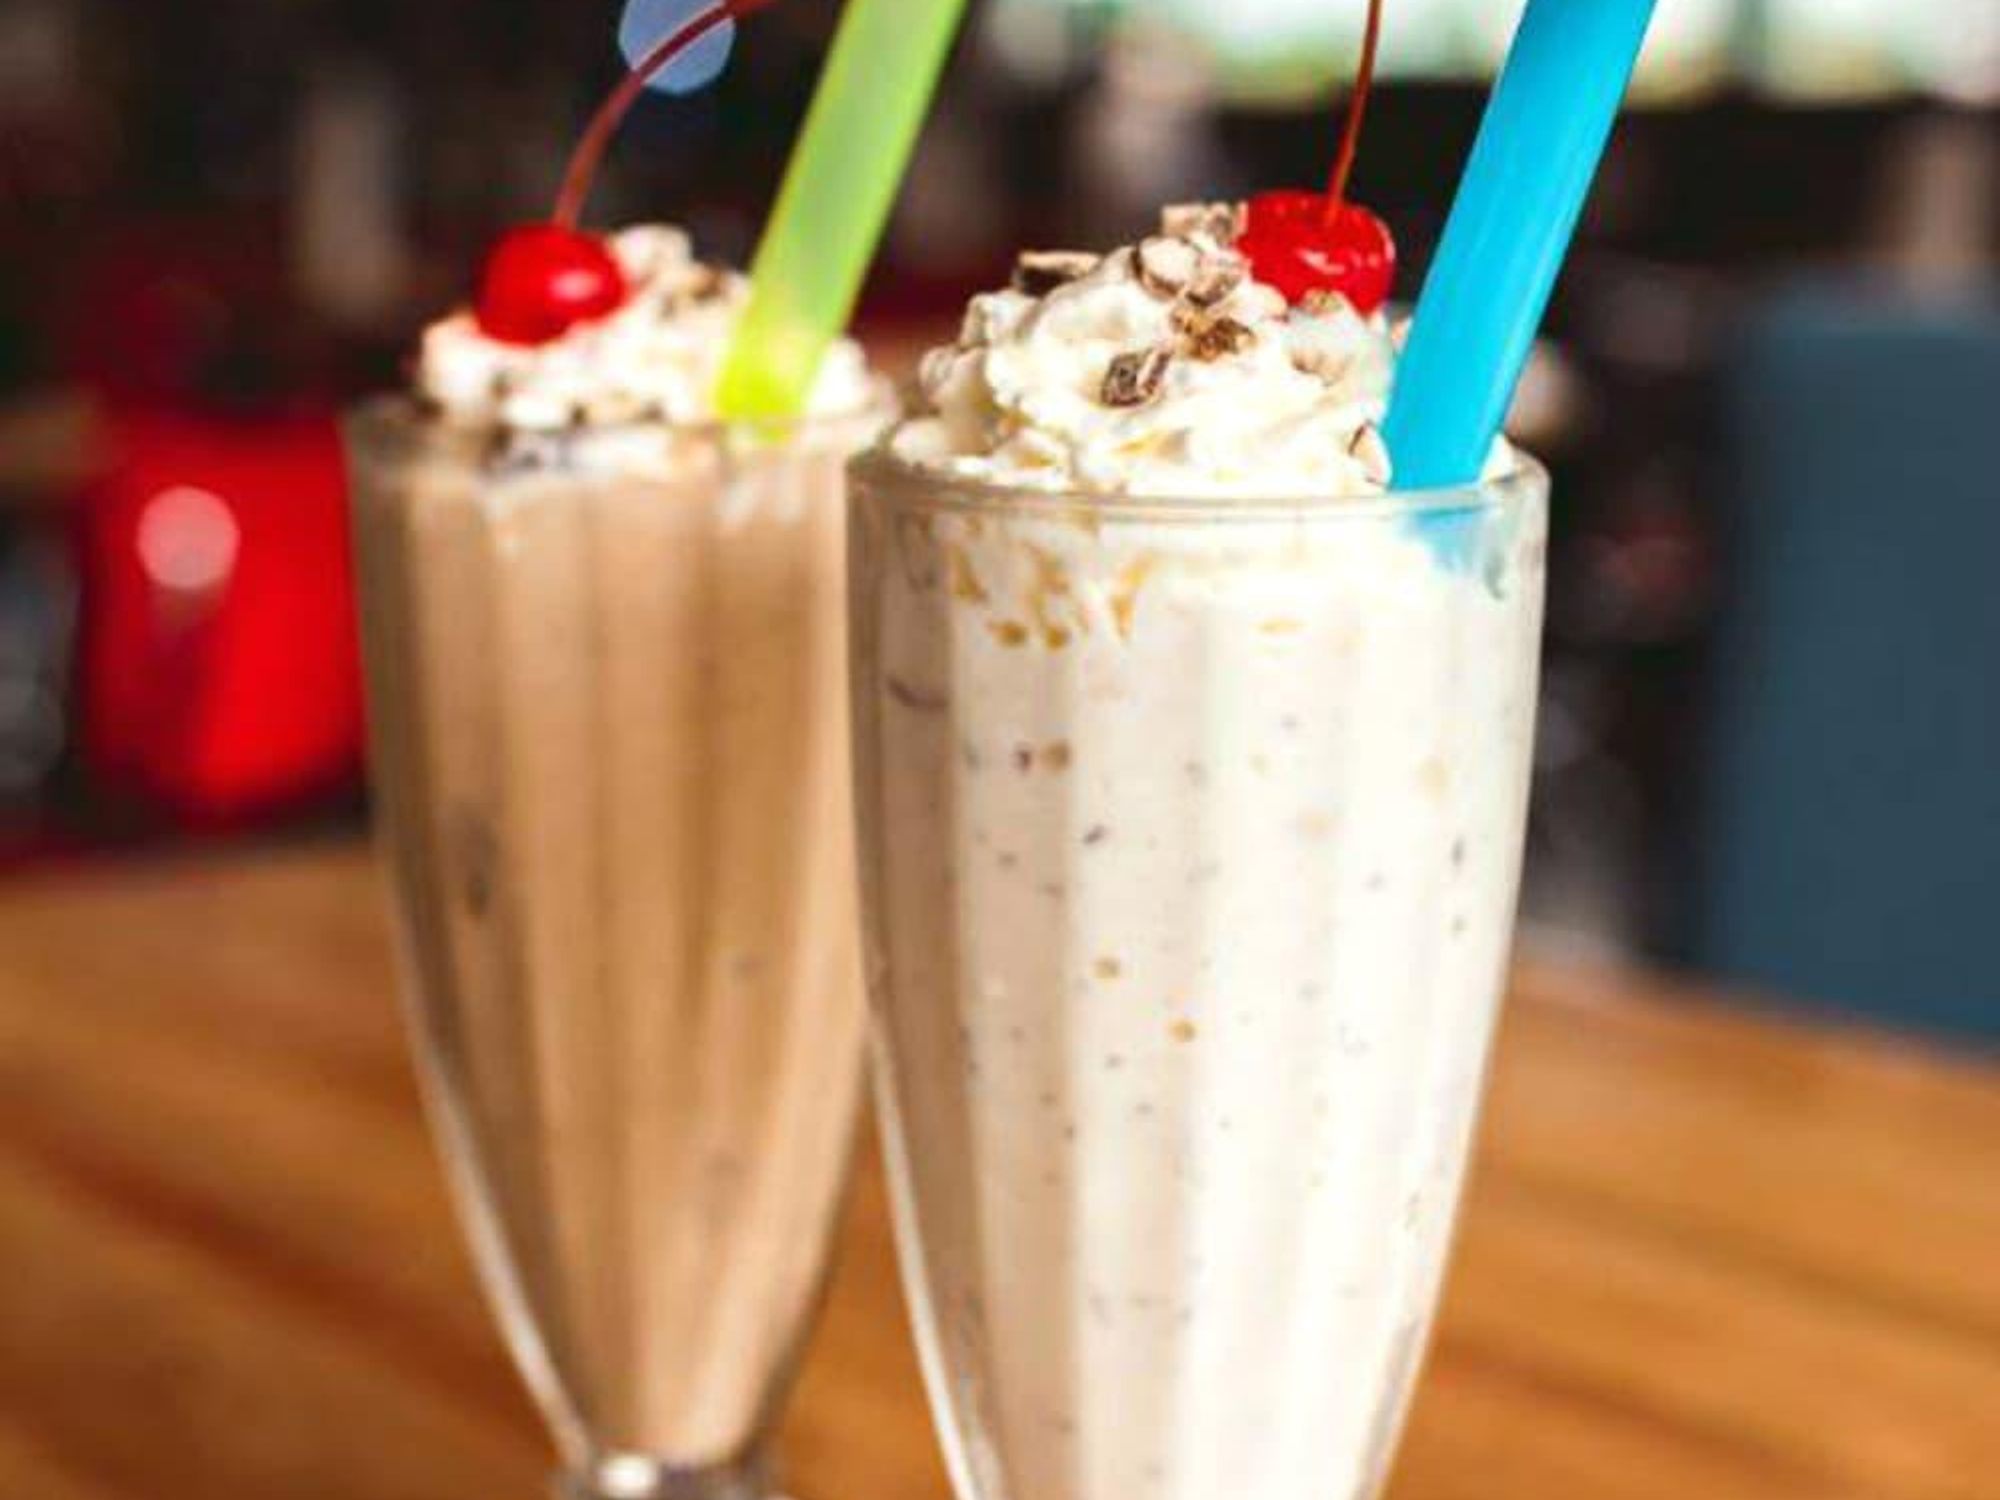 Fuddruckers chills out with limited-time-only Whopper Milkshake